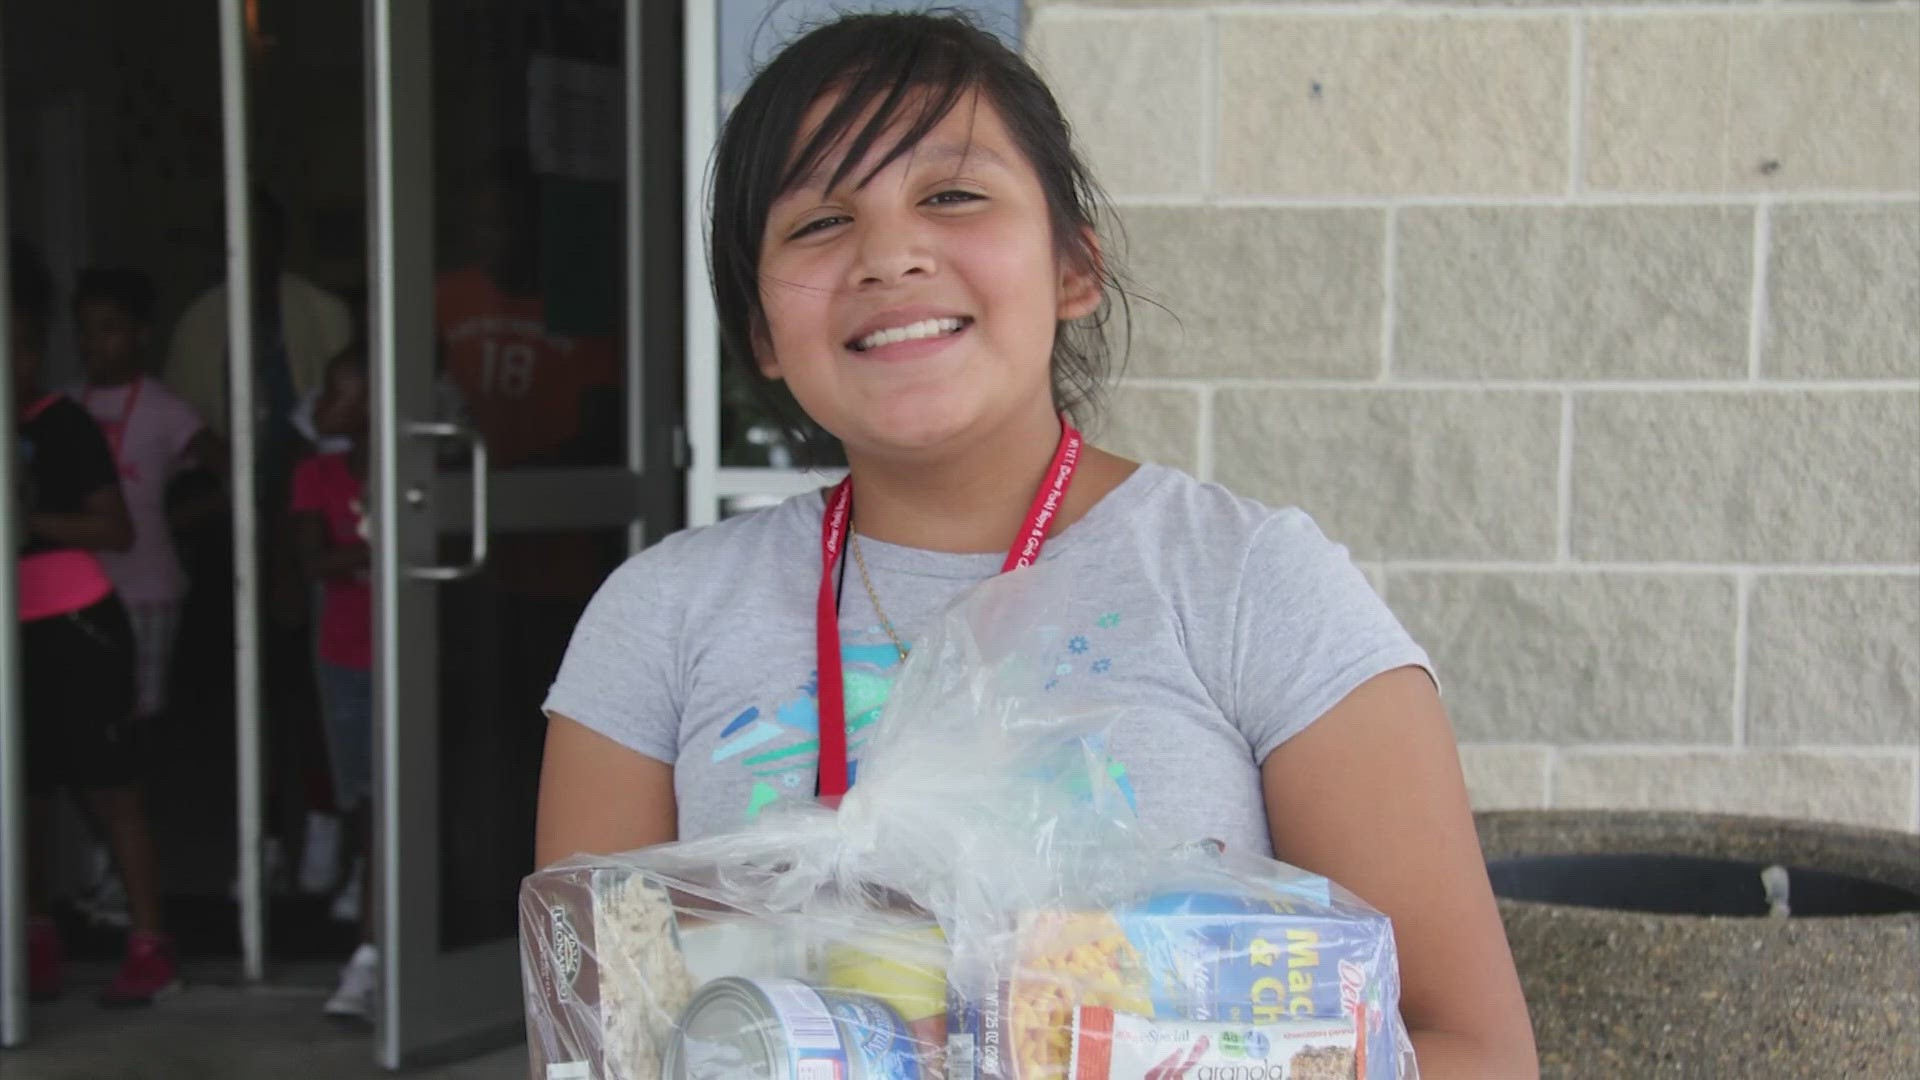 KHOU 11 partnered with the Houston Food Bank to help provide weekend meals to Houston kids.